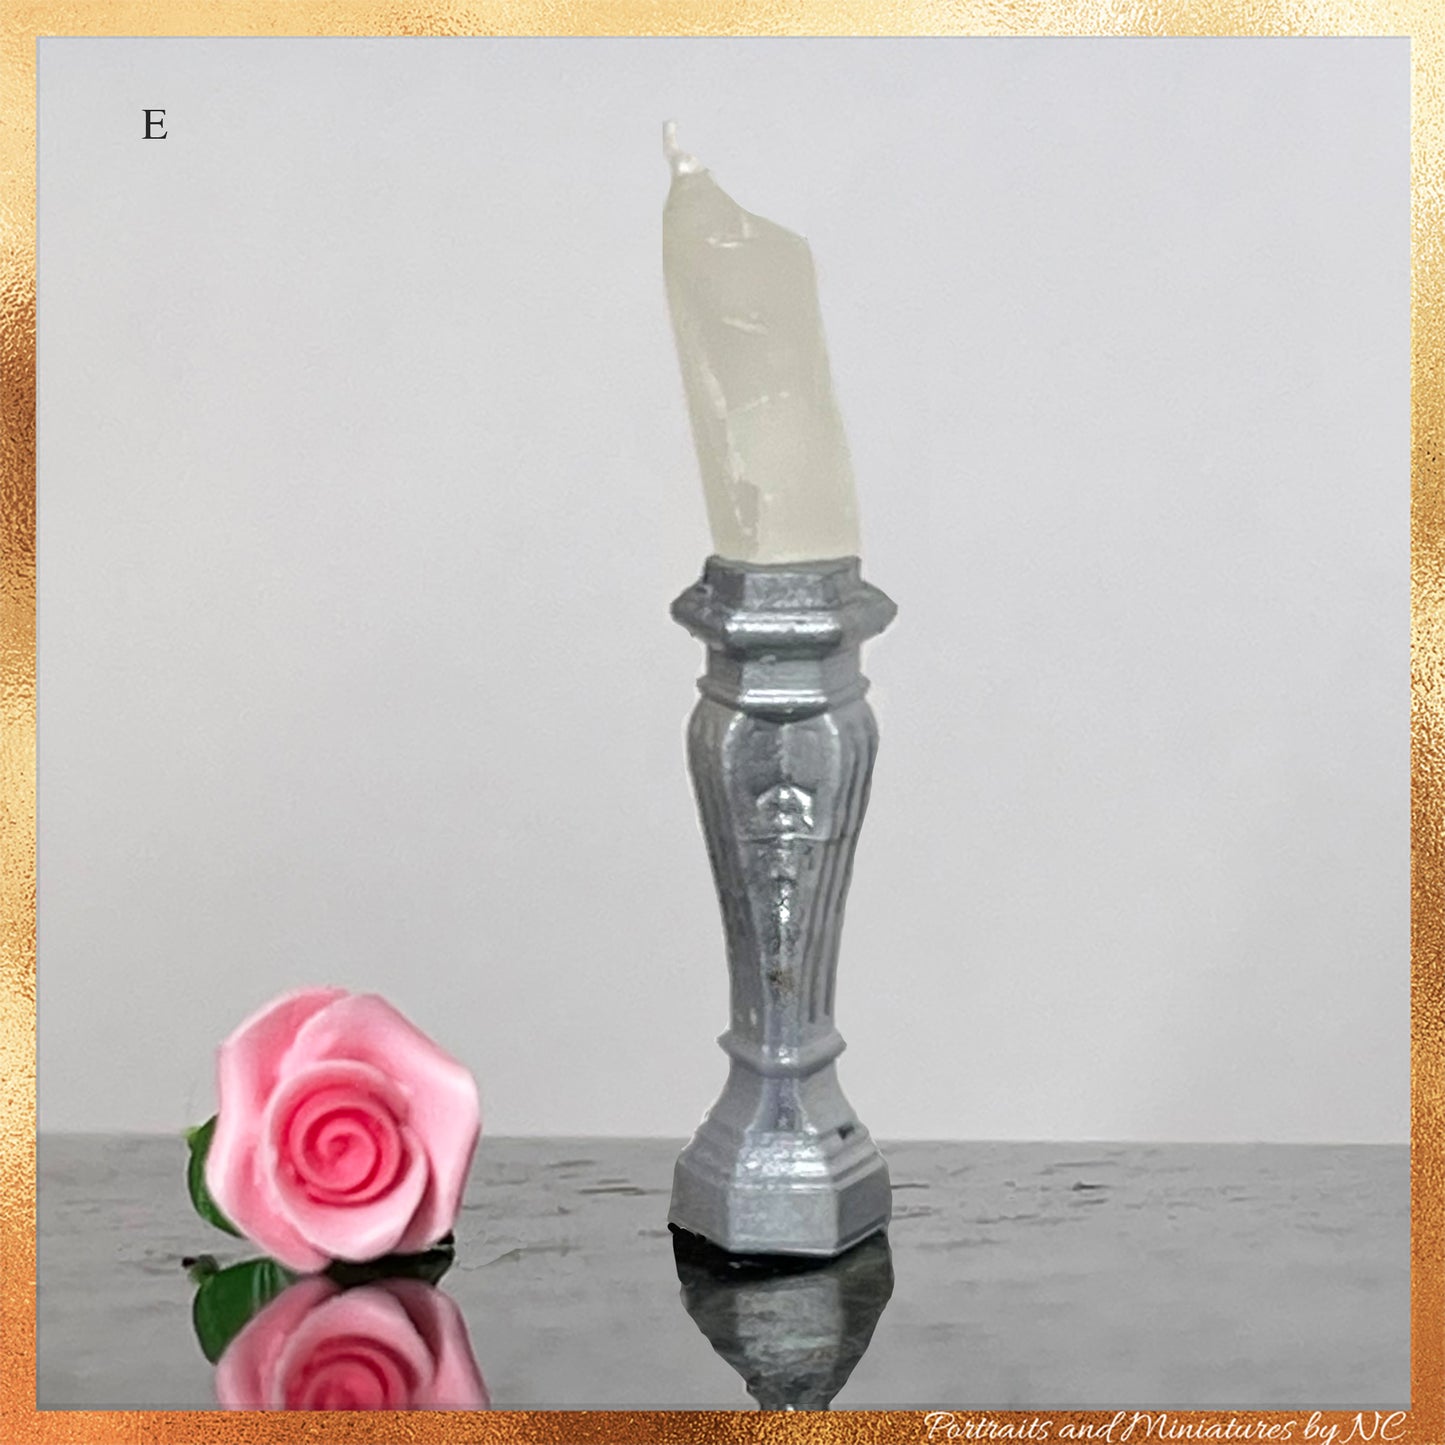 French Style Miniature Resin Pillars with Candles, Set of 2: DOLLHOUSE 1:12 Scale